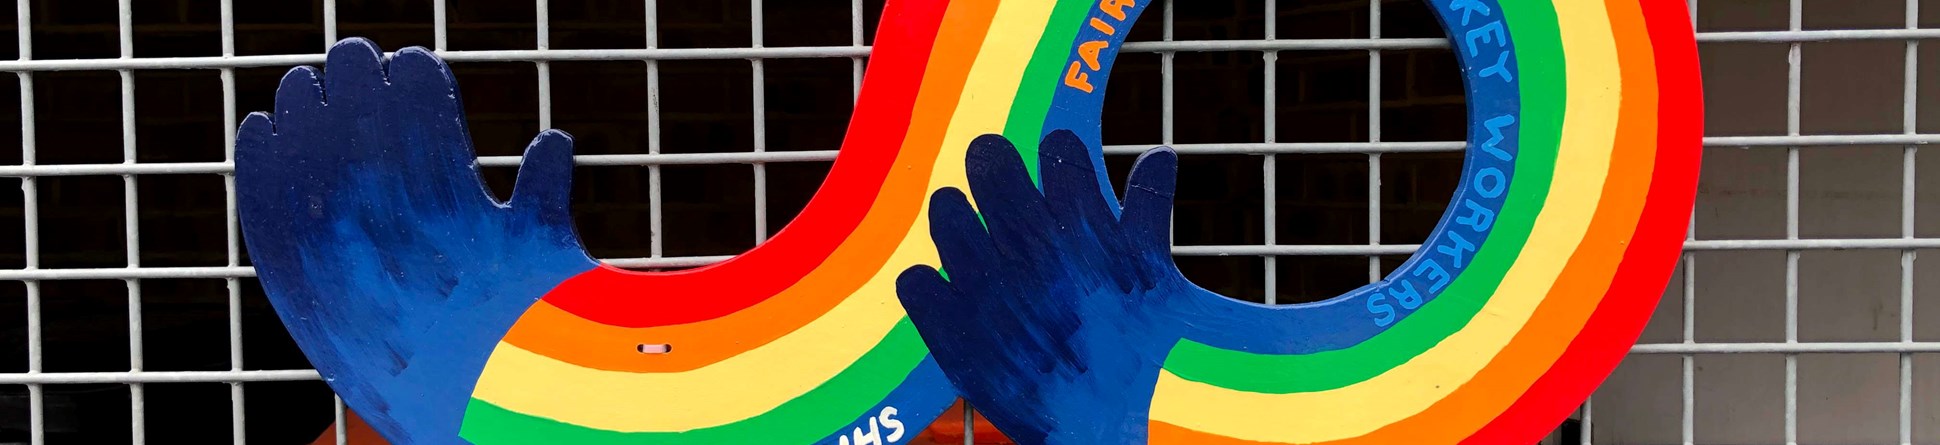 Rainbow colours with hands at each. Words 'Support Our NHS, Fair Wages for Key Workers' written on the blue band of the rainbow. The graphic is attached to a metal fence.